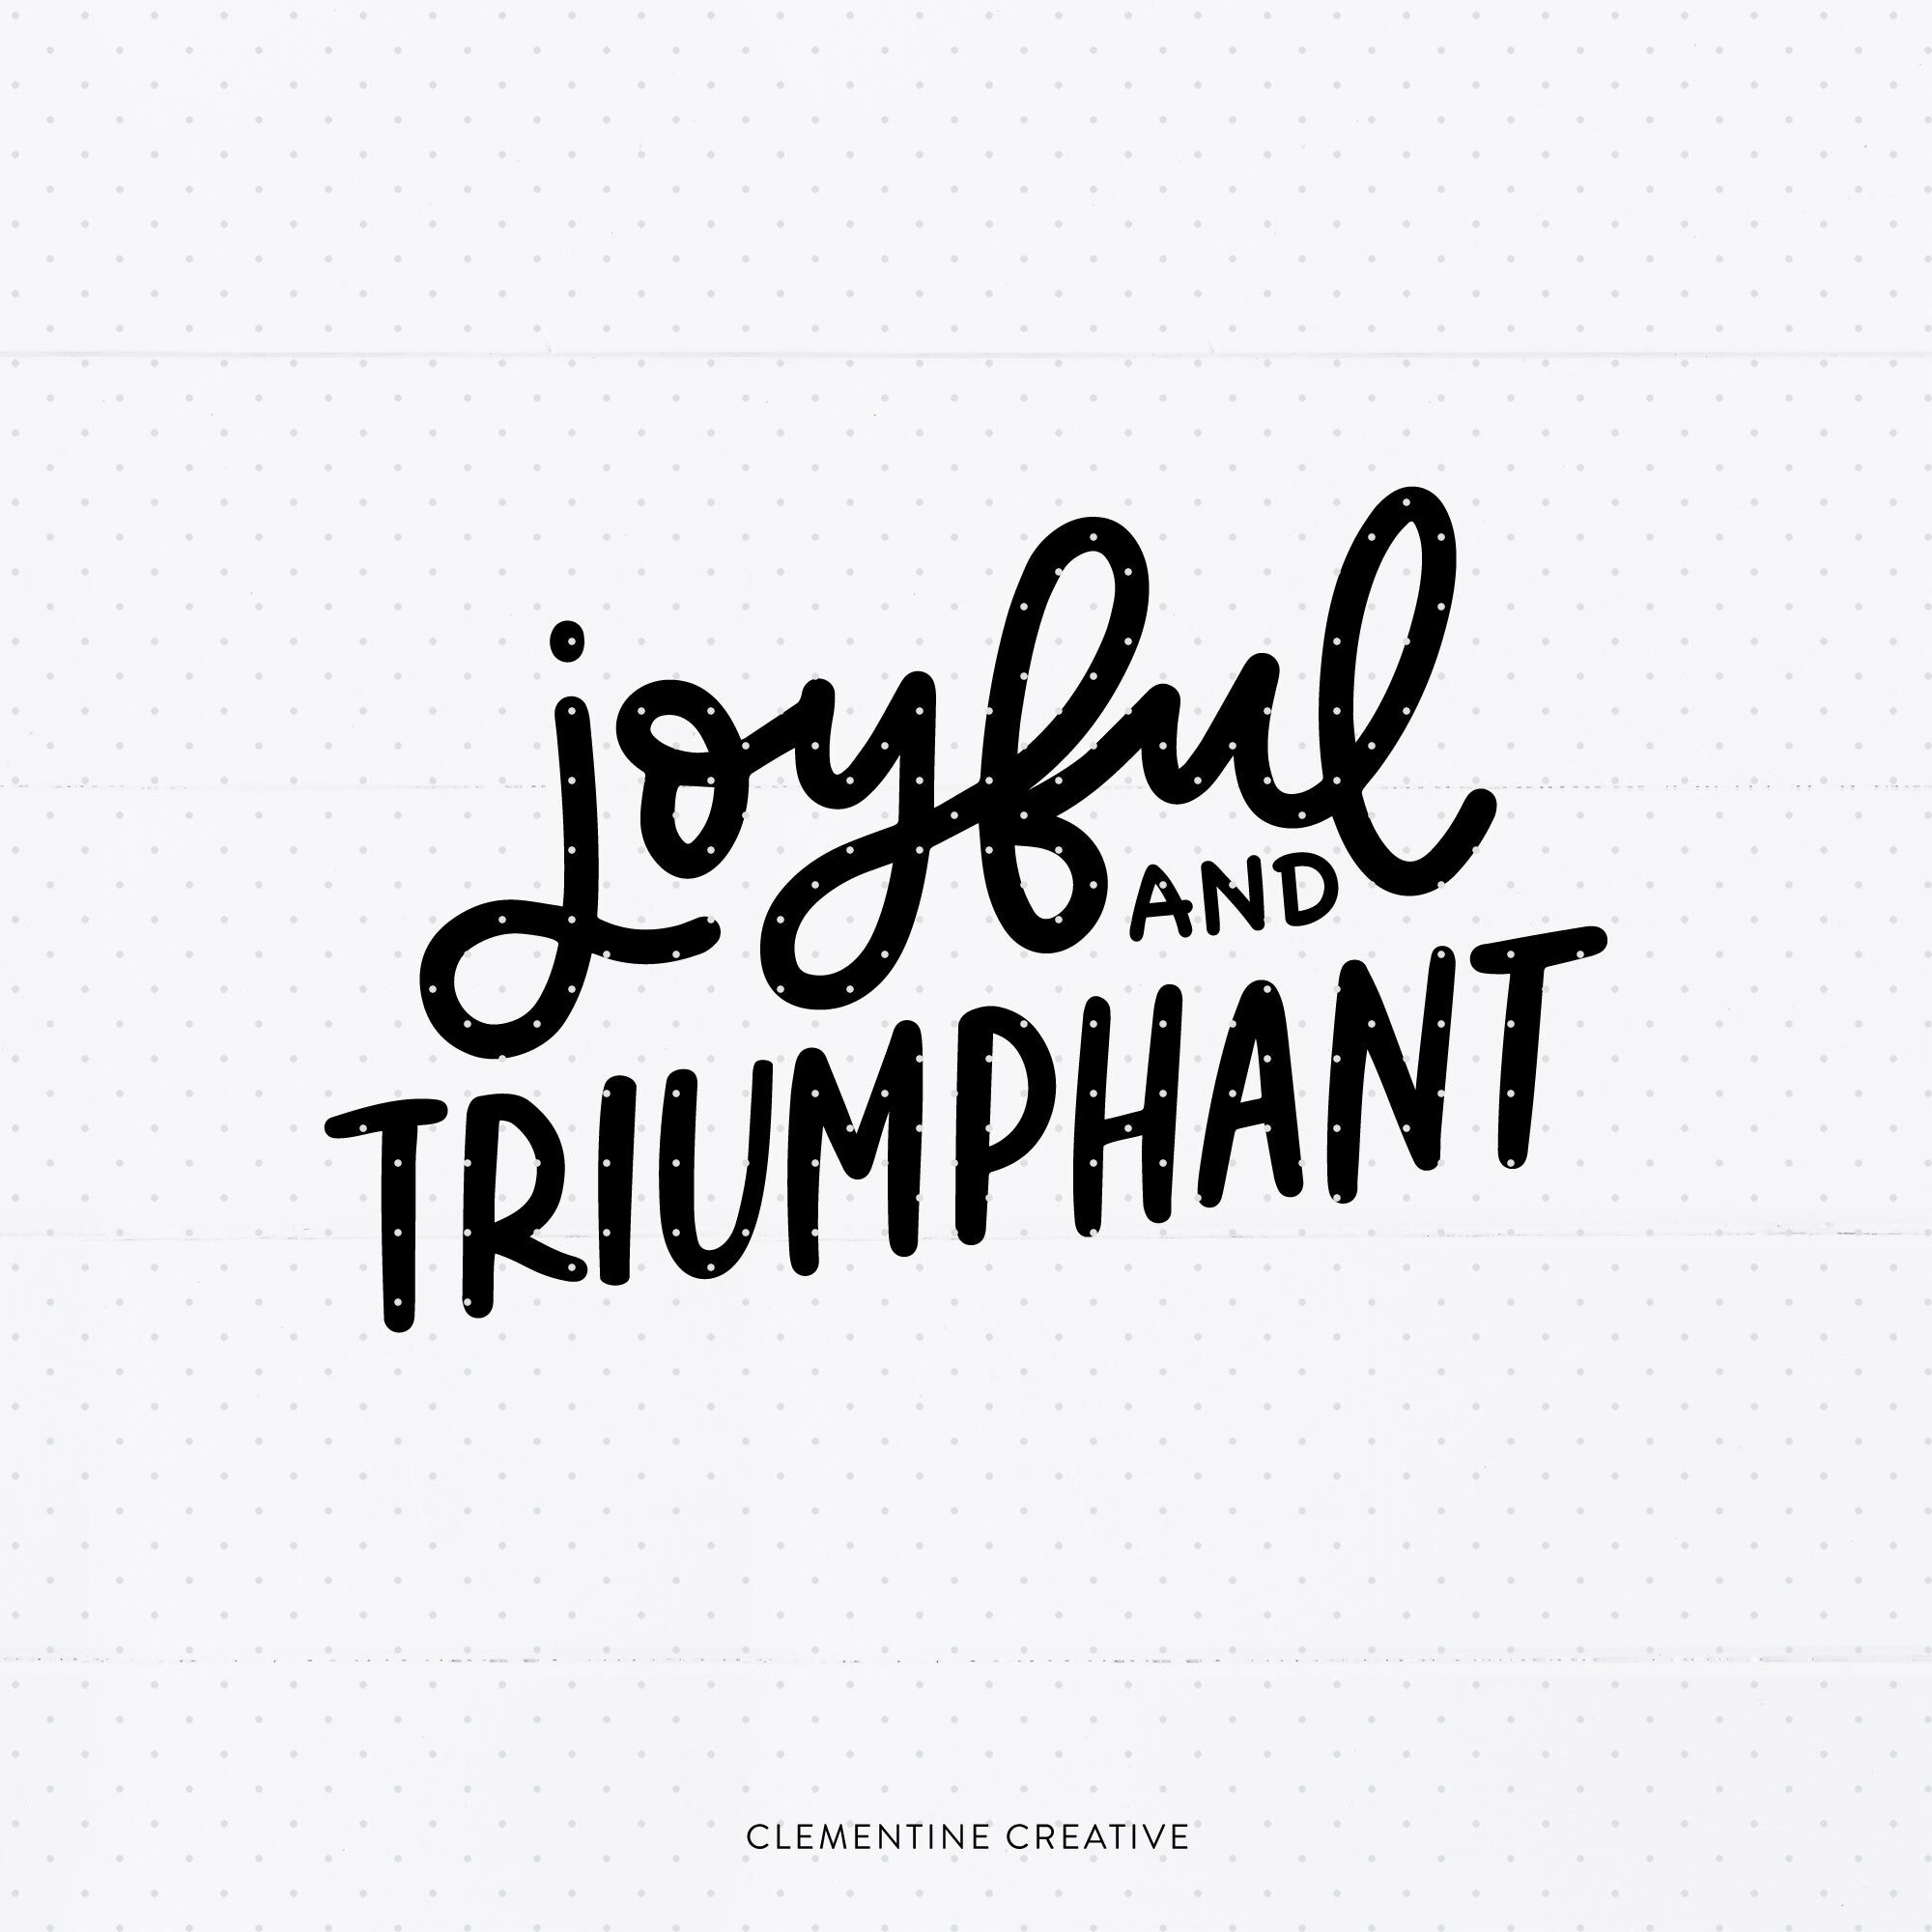 Christmas Quote Svg Joyful And Triumphant Svg Christmas Saying Svg By Clementine Creative Thehungryjpeg Com